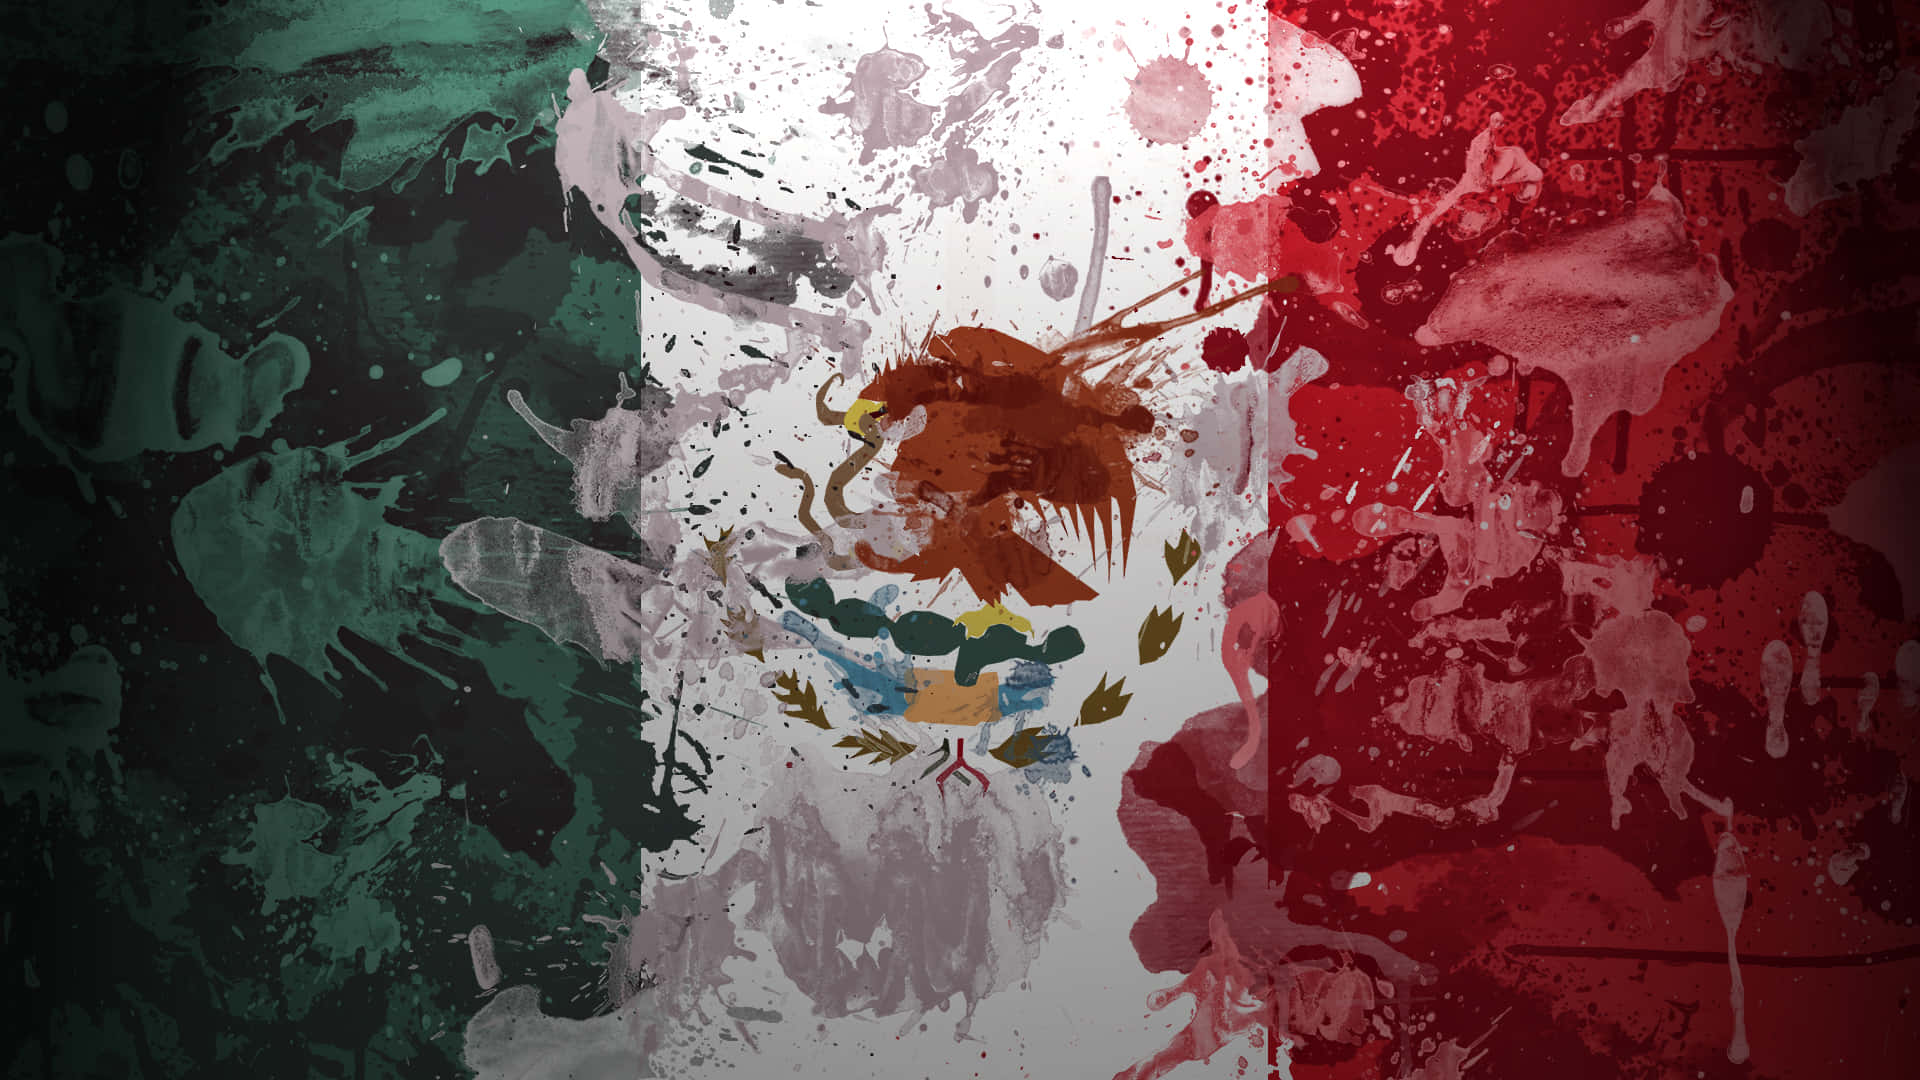 Abstract Mexican Flag Artistic Expression.jpg Wallpaper